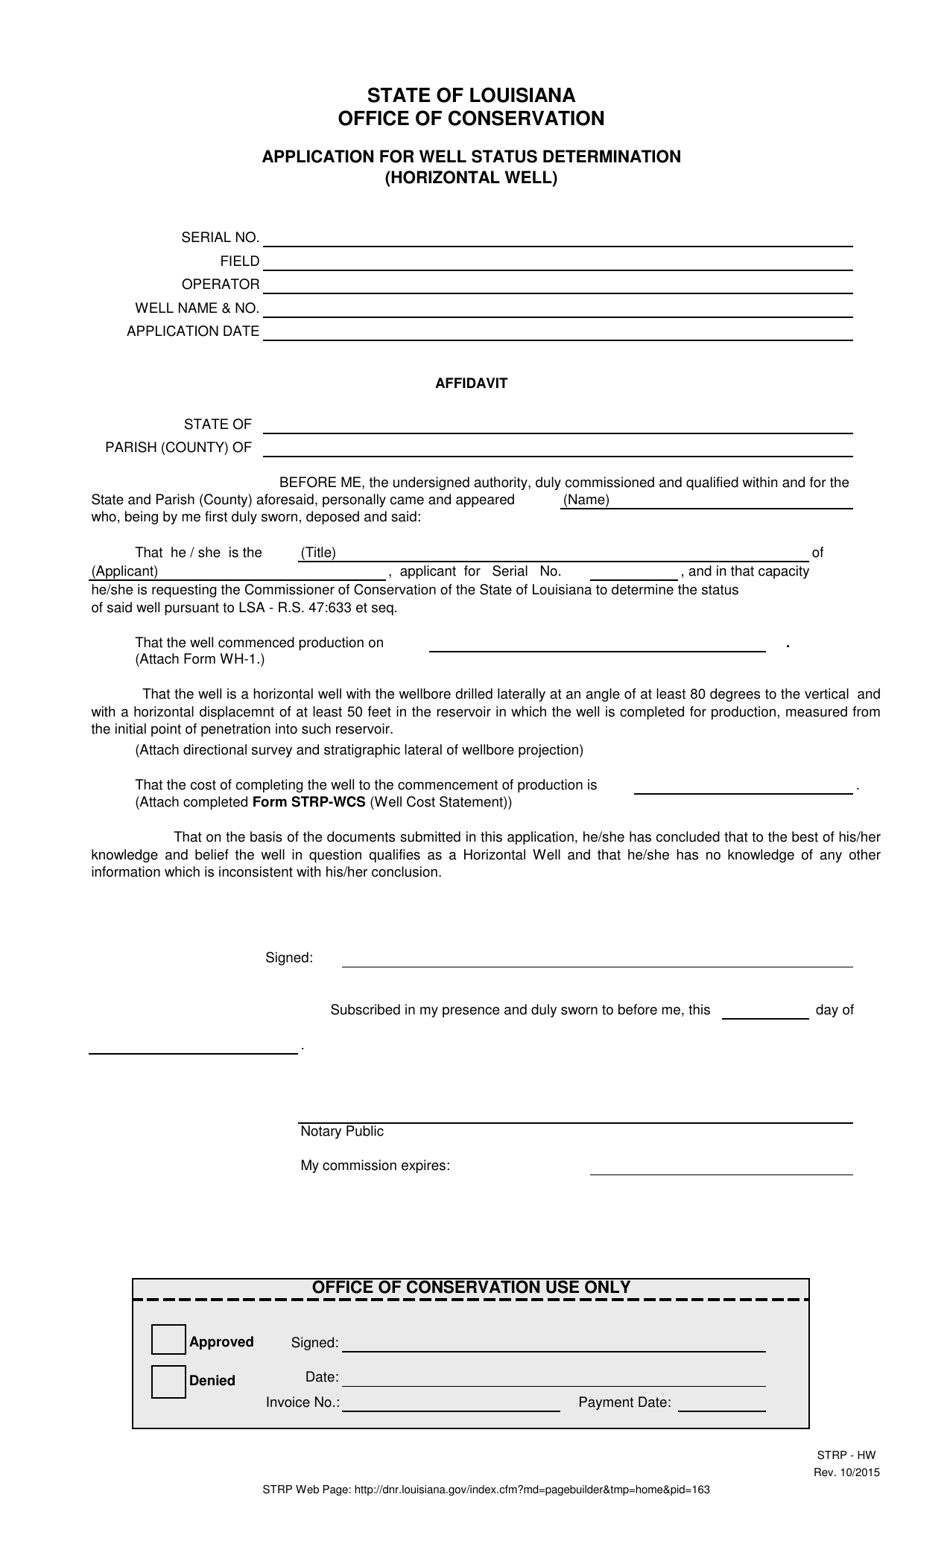 Form STRP-HW Application for Well Status Determination (Horizontal Well) - Louisiana, Page 1